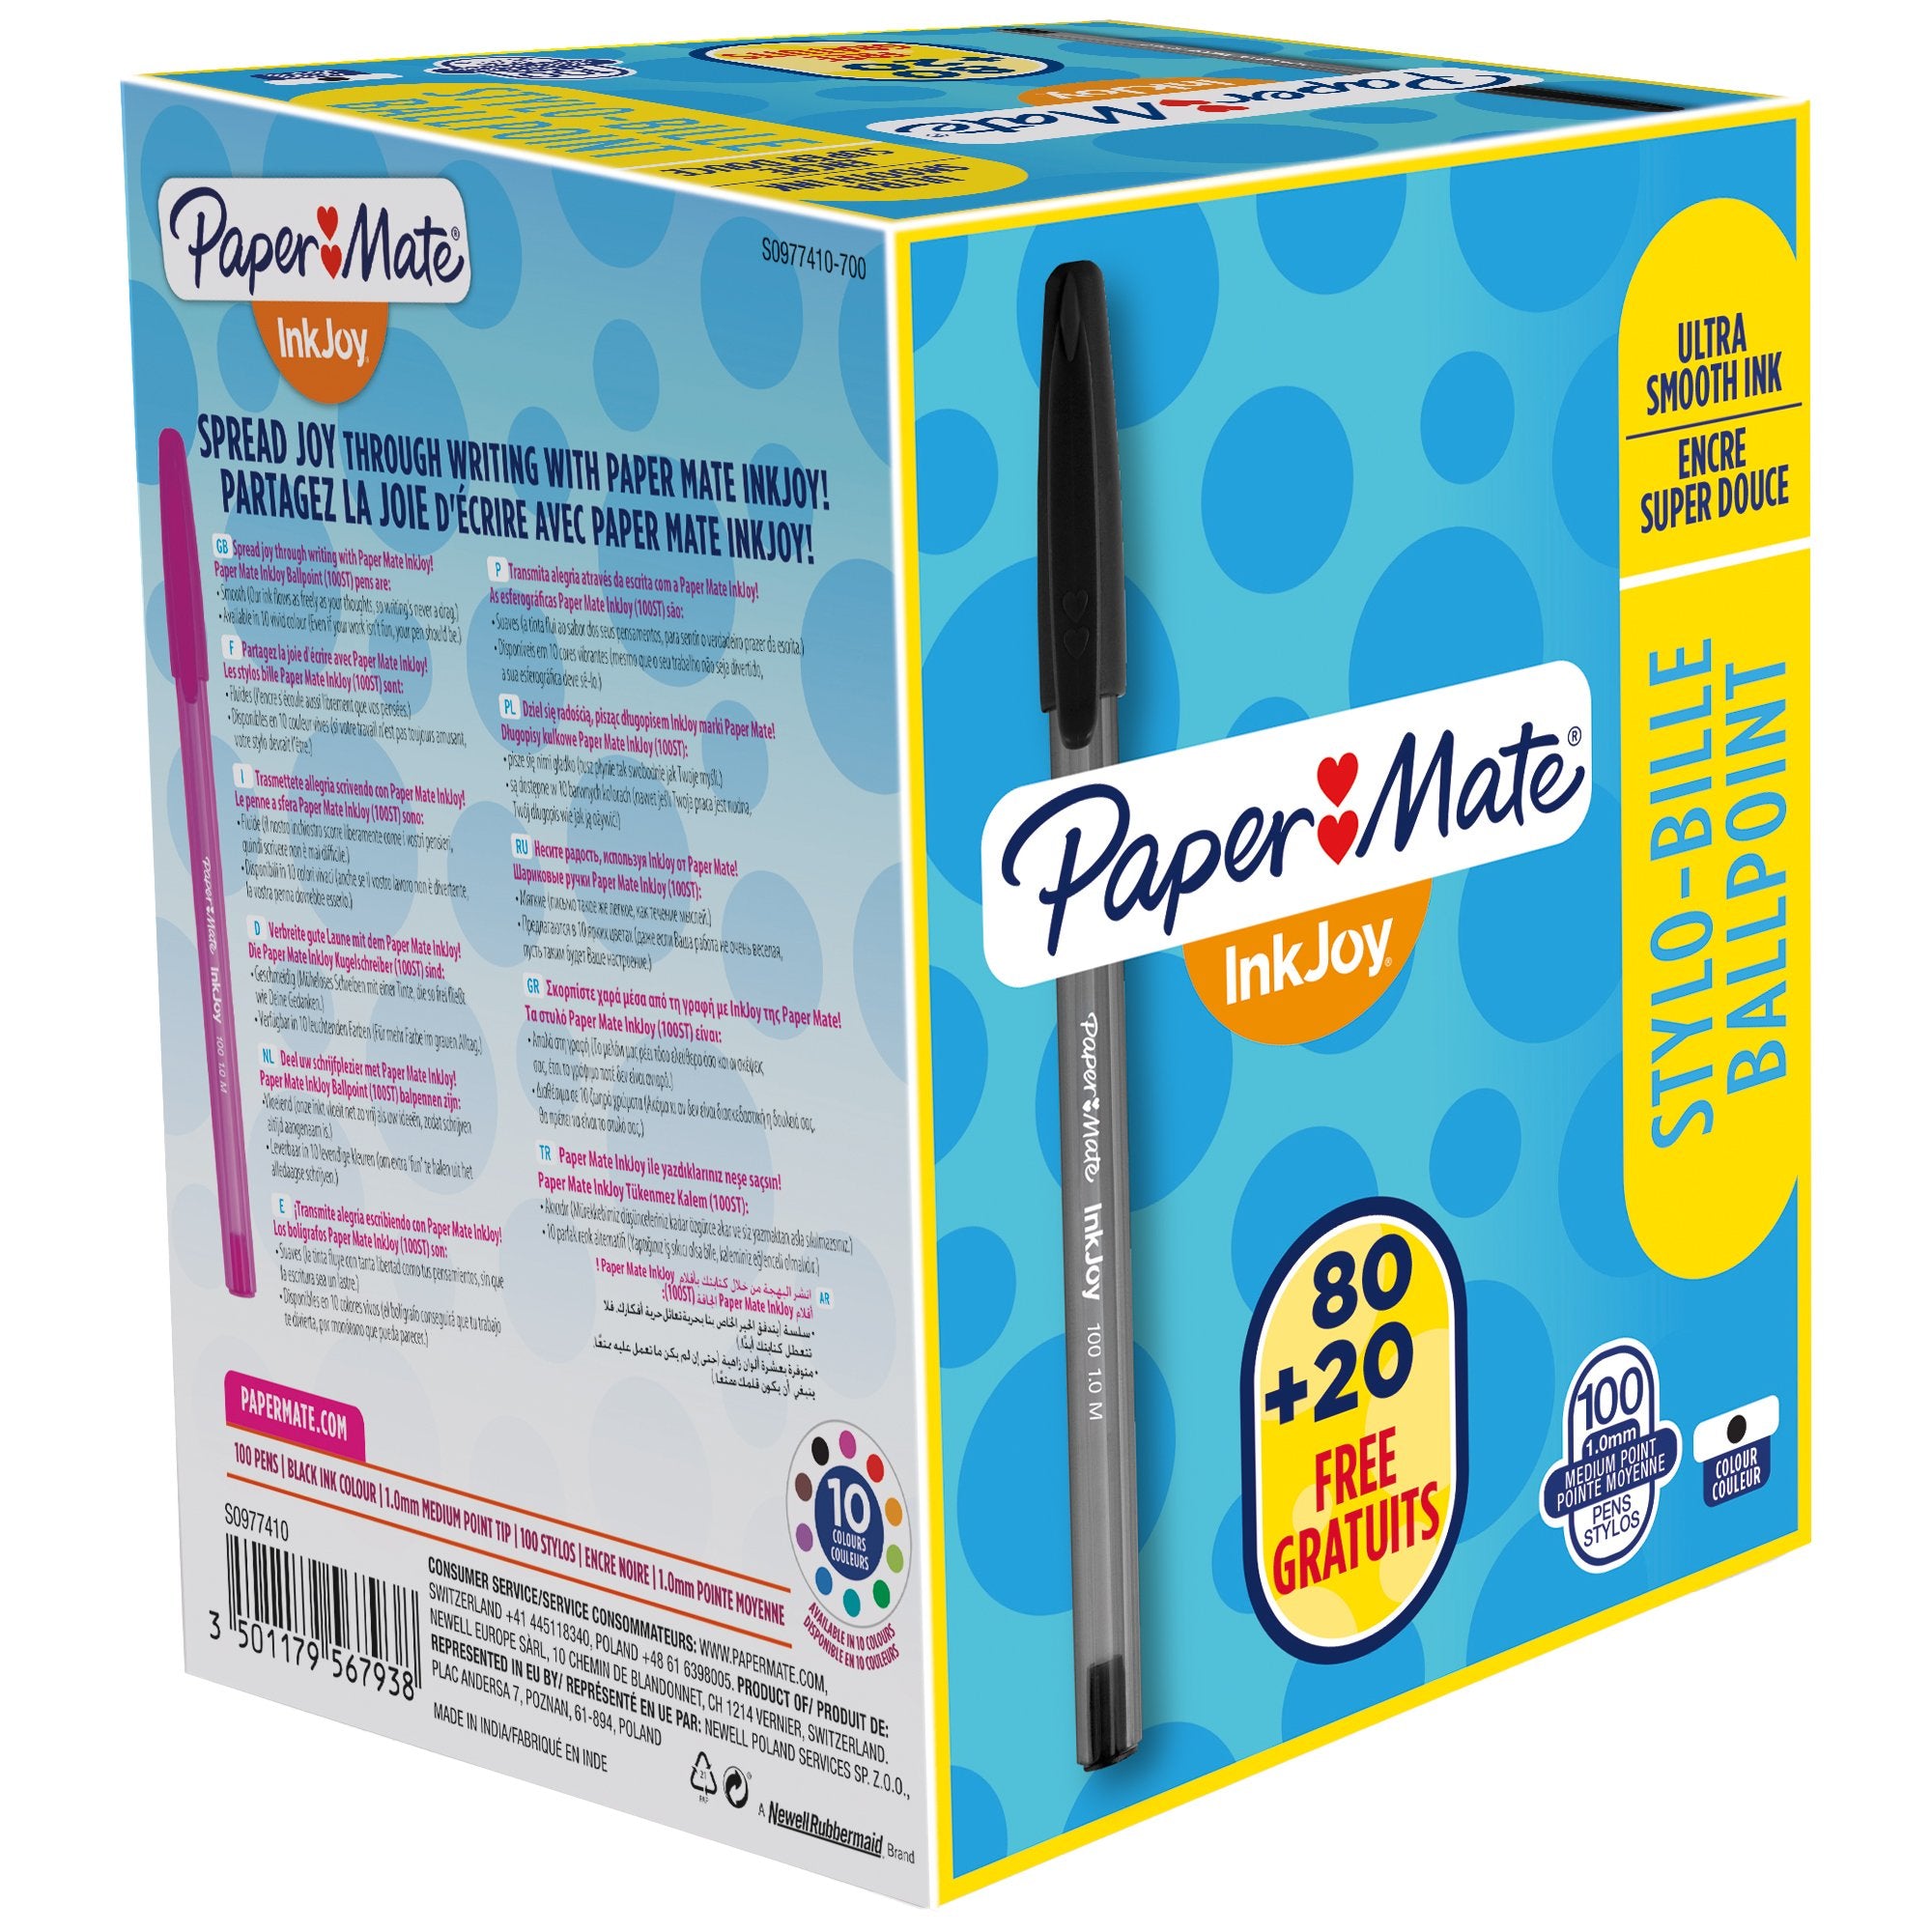 papermate-special-pack-8020penna-sfera-inkjoy-100-nero-1-0mm